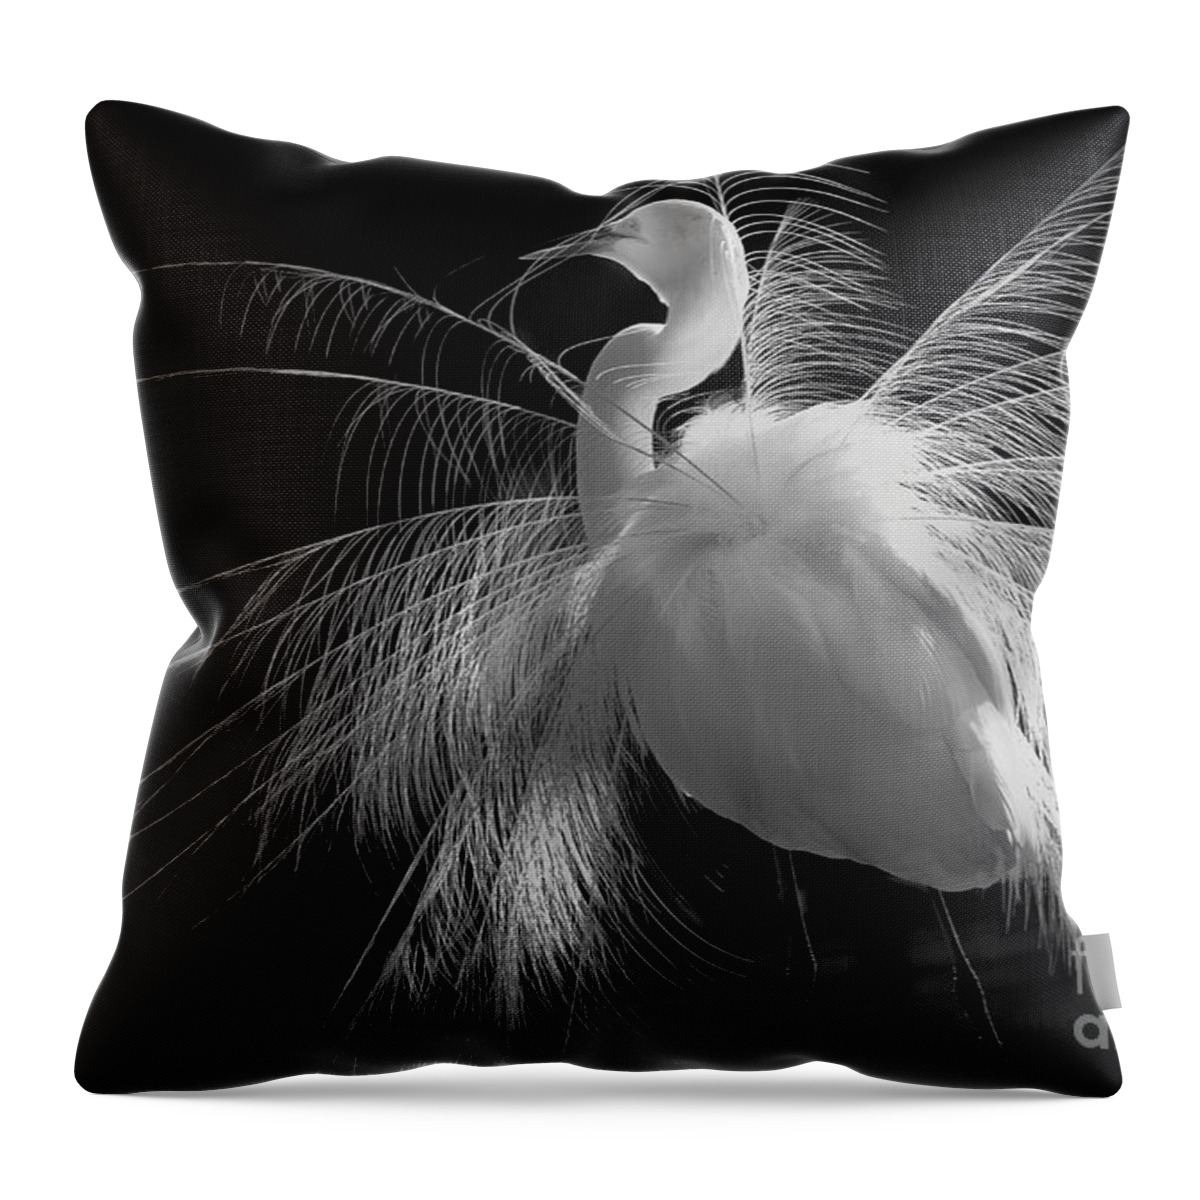   Great White Egret Displaying Breeding Plumage; Black And White Portrait Of Great Egret Displaying Plumage Throw Pillow featuring the photograph Great White Egret Portrait - Displaying Plumage by Mary Lou Chmura